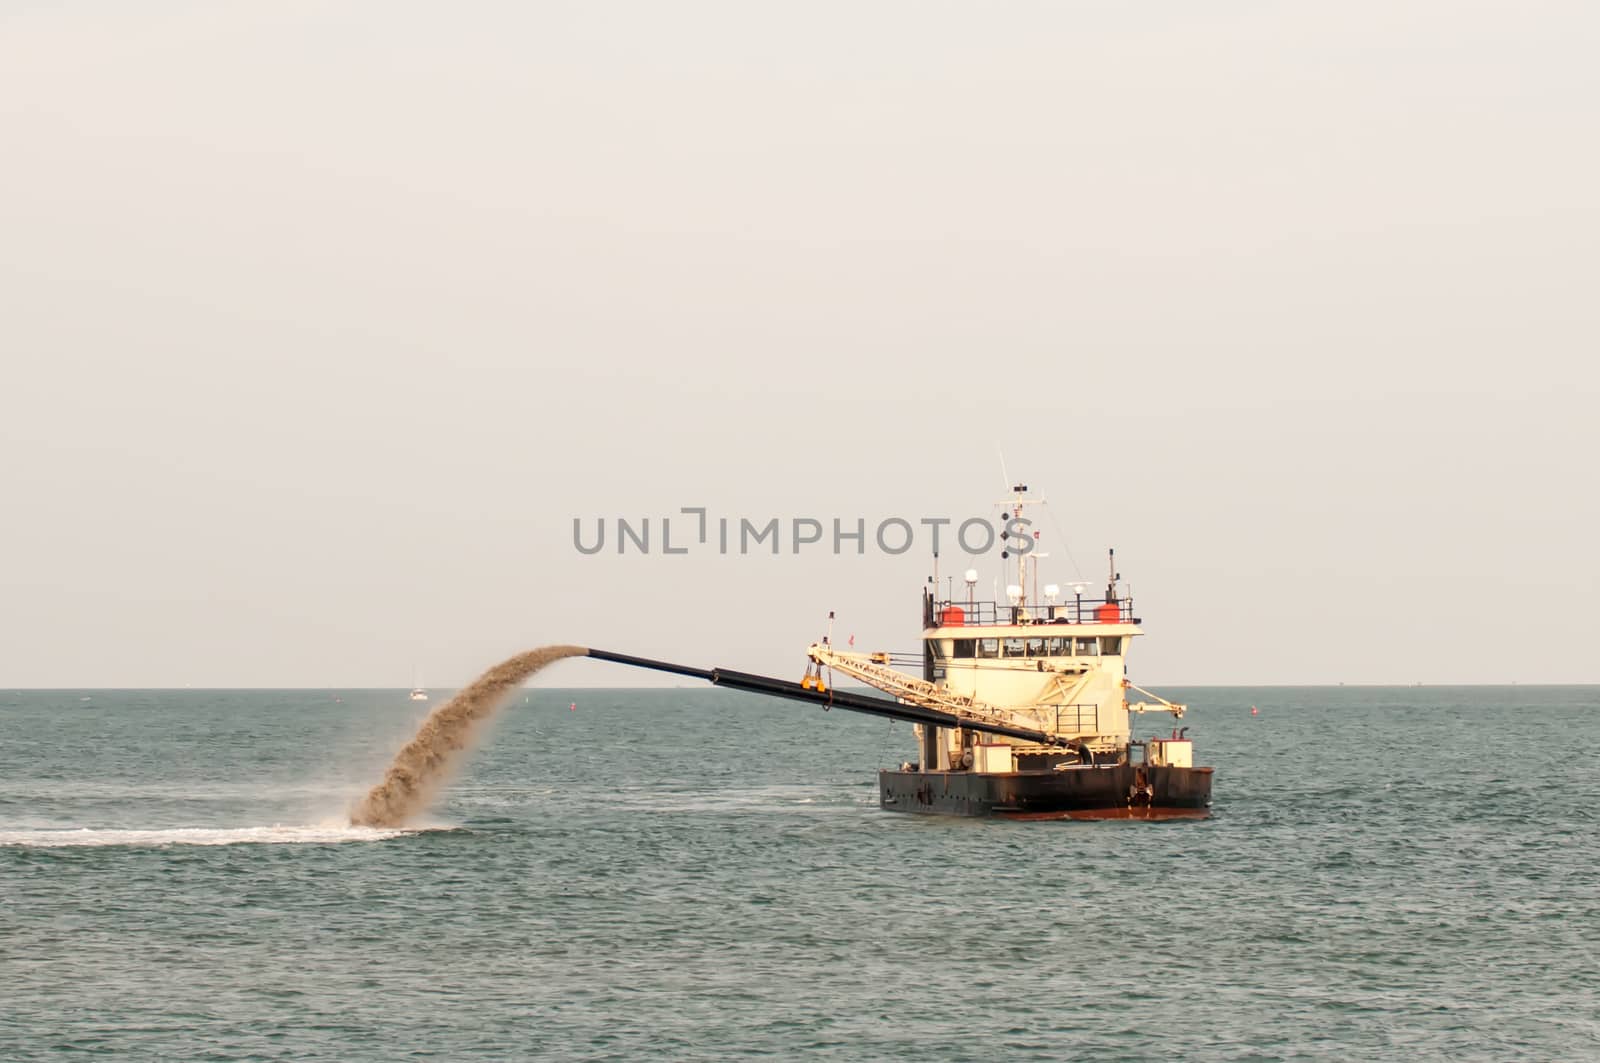 Barge Pipe pushing sand onto the beach by digidreamgrafix